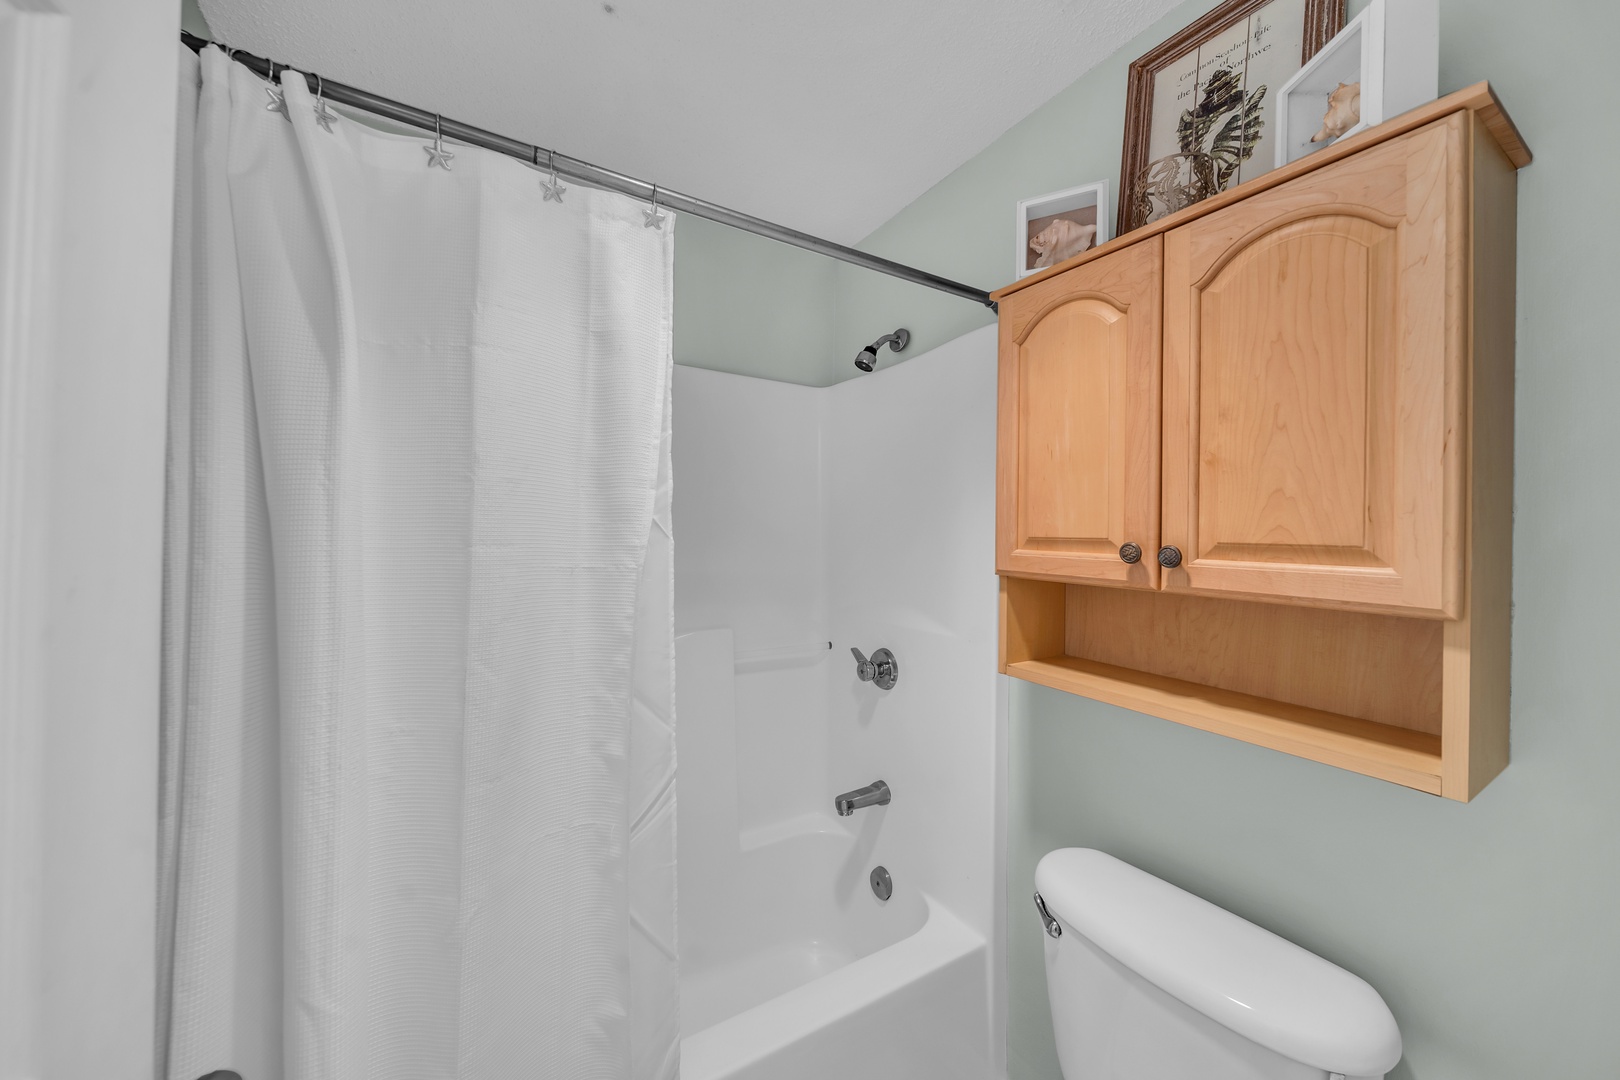 The Primary Bedroom has a Private Bath separate from the sink and closet.